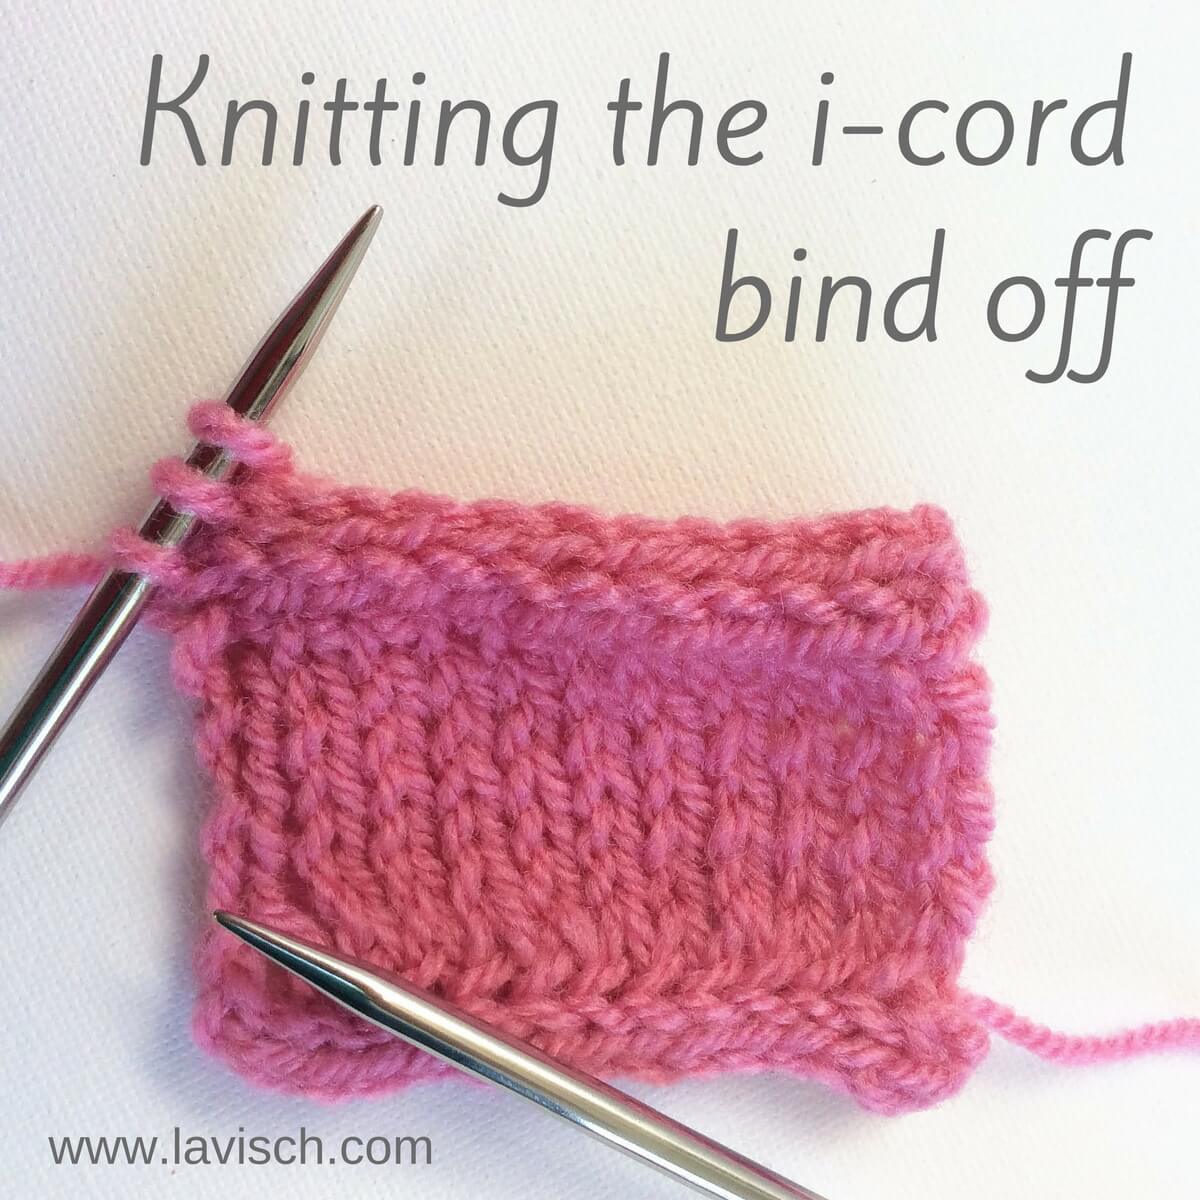 I-Cord Knitting Patterns - In the Loop Knitting